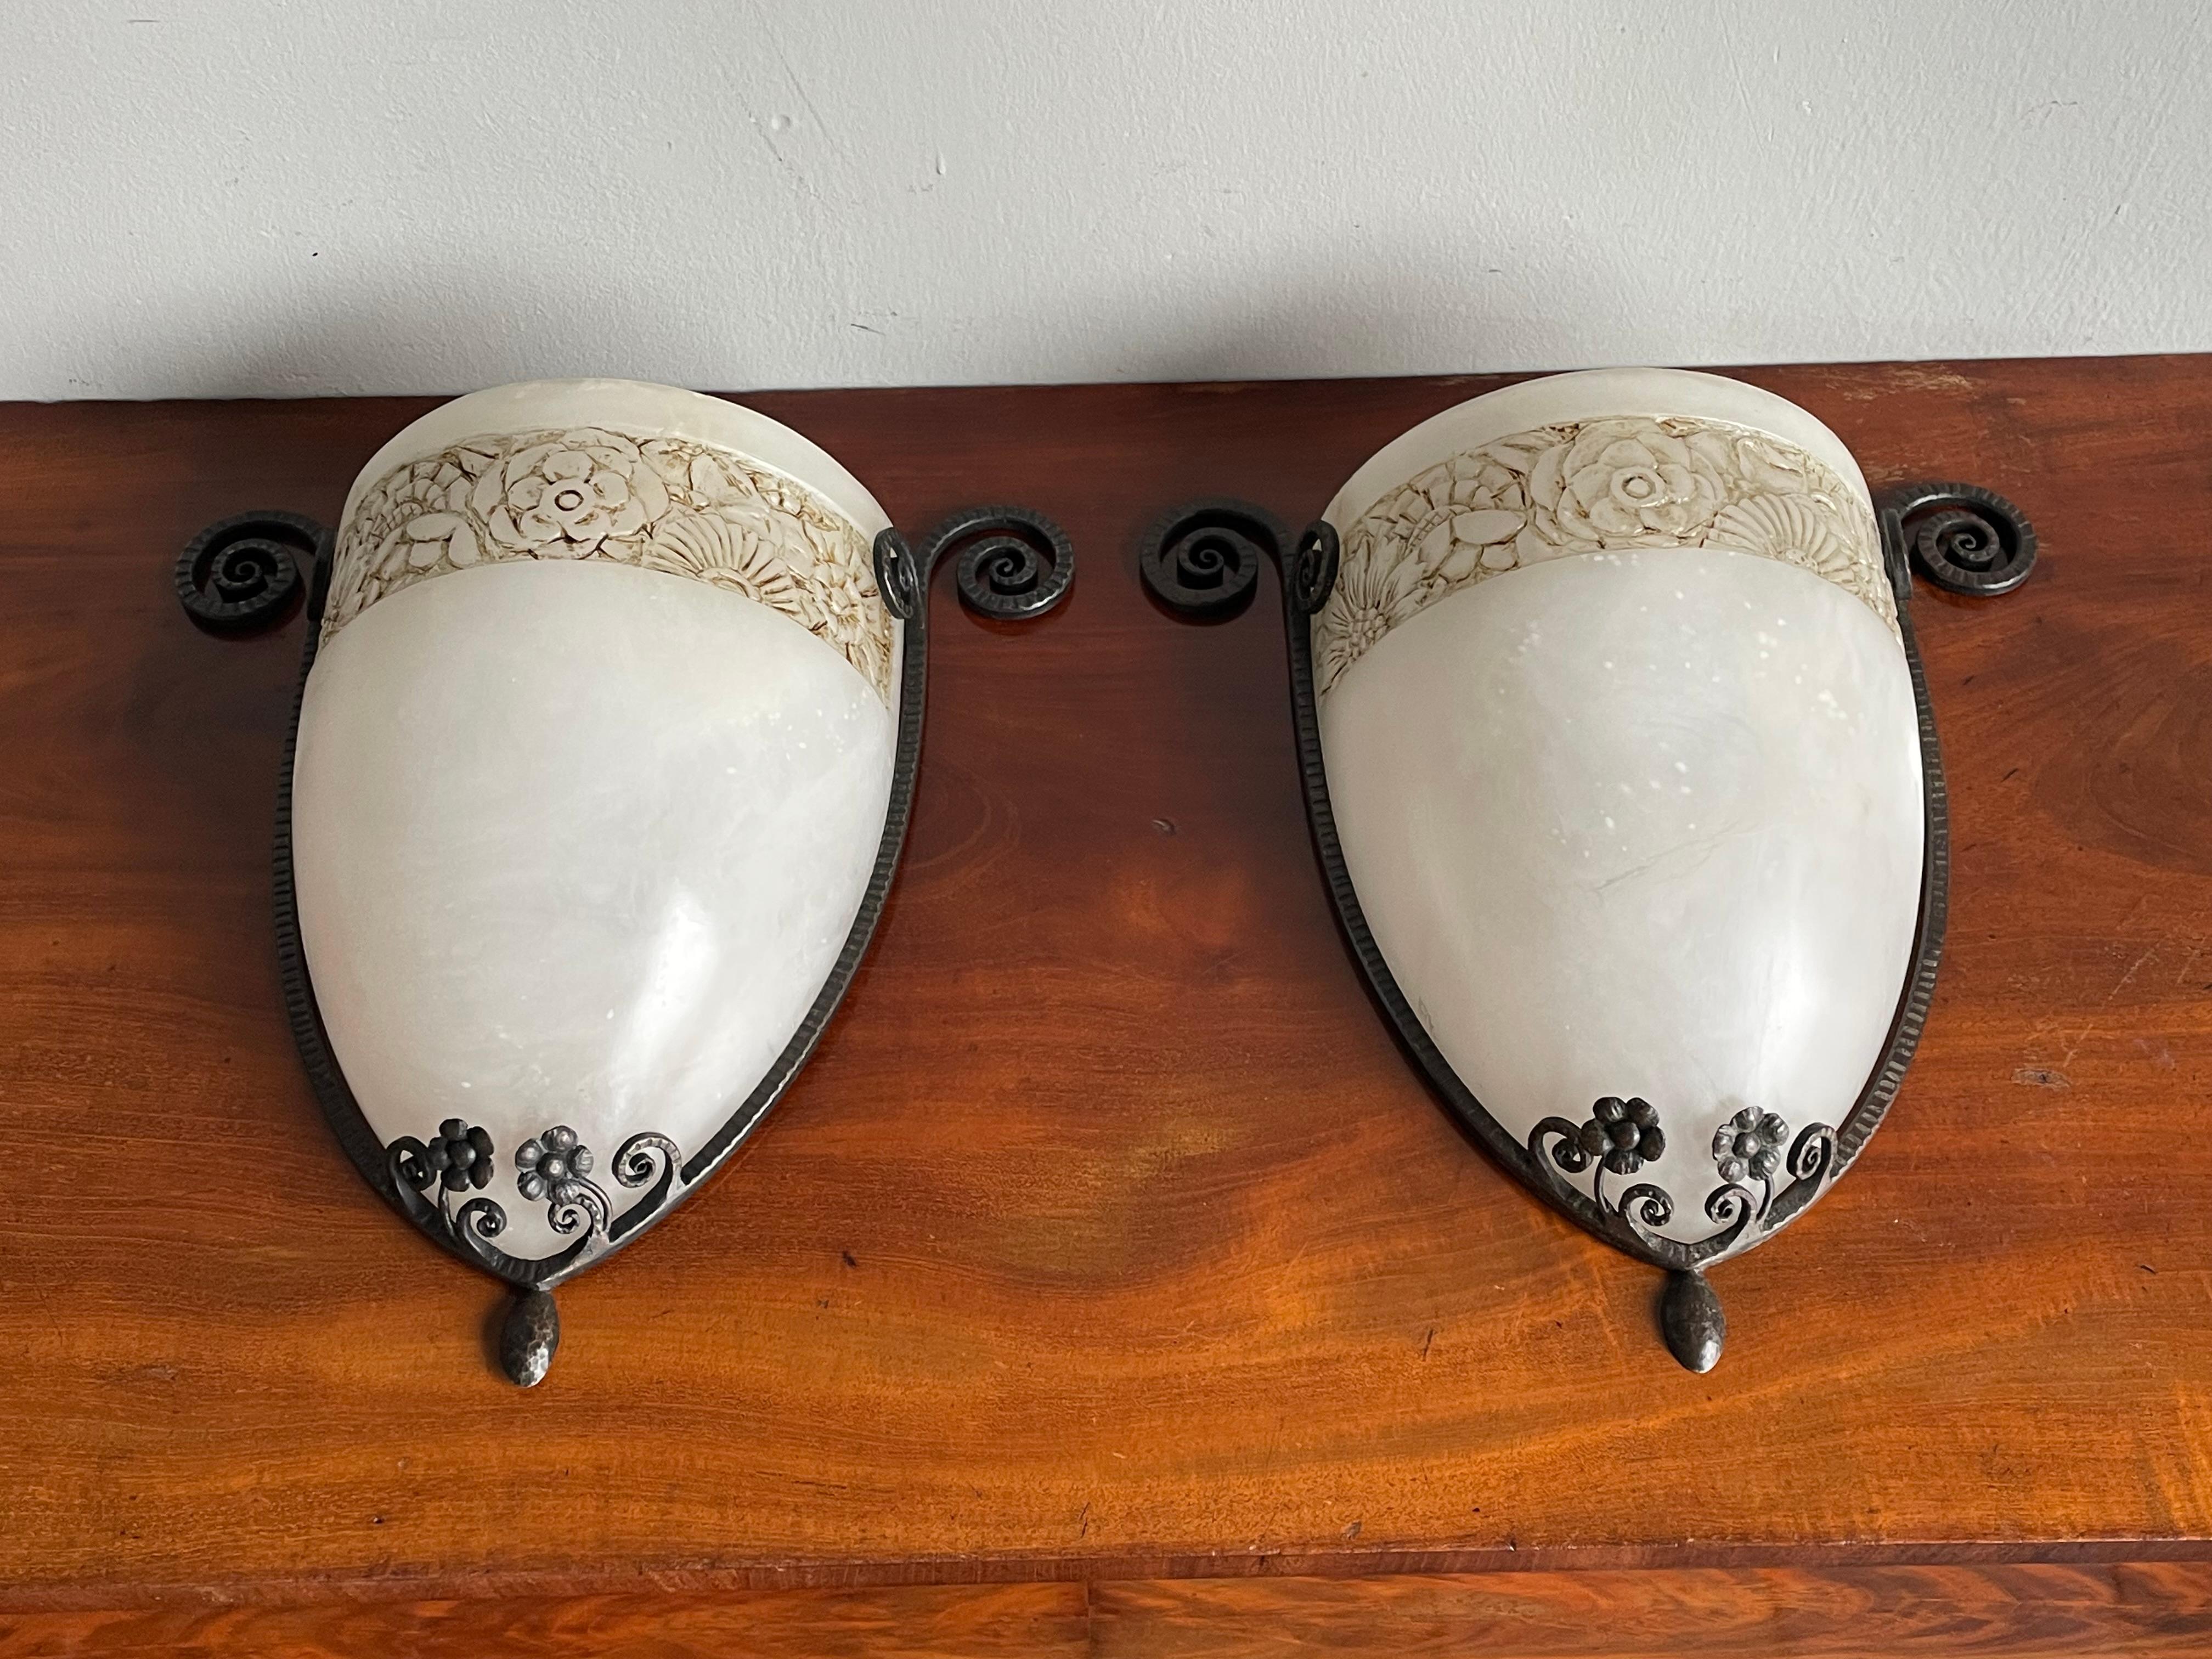 Real and very rare pair of Art Deco alabaster sconces.

Over the years we have seen and sold our fair share of top quality made, antique alabaster pendant lights and chandeliers. And when we found these Art Deco wall sconces, we again realized how